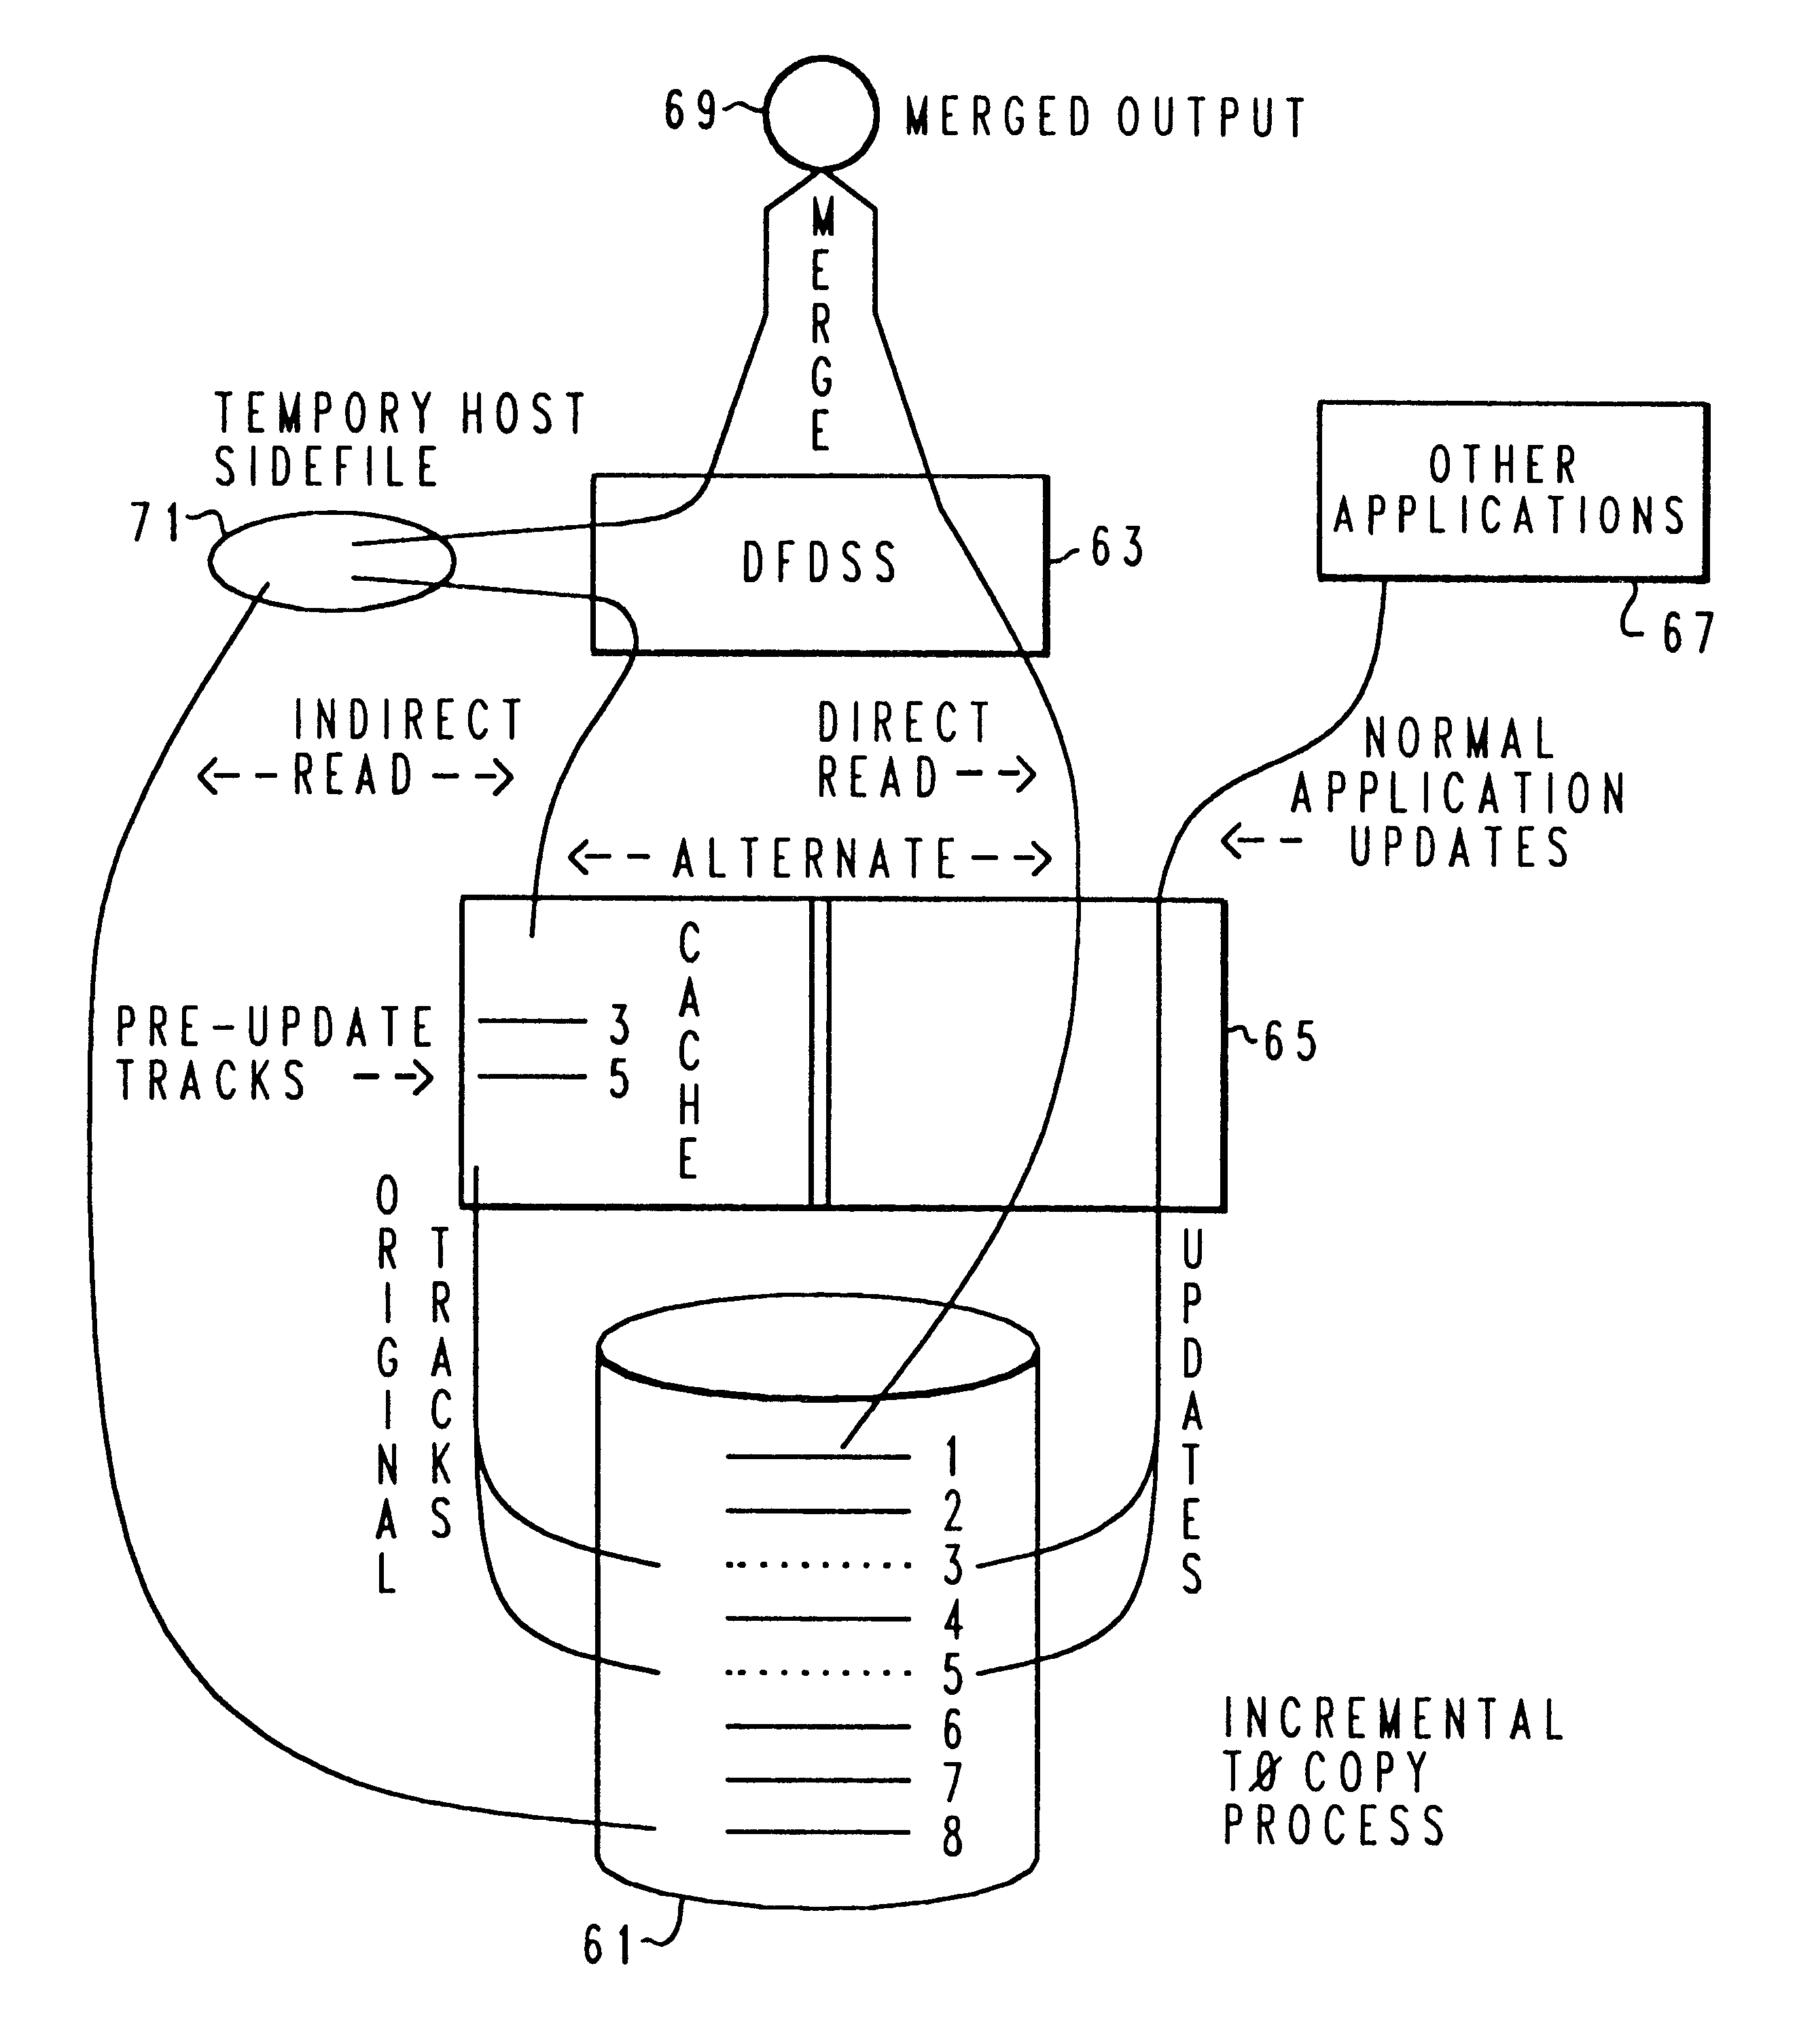 Method and system for incremental time zero backup copying of data